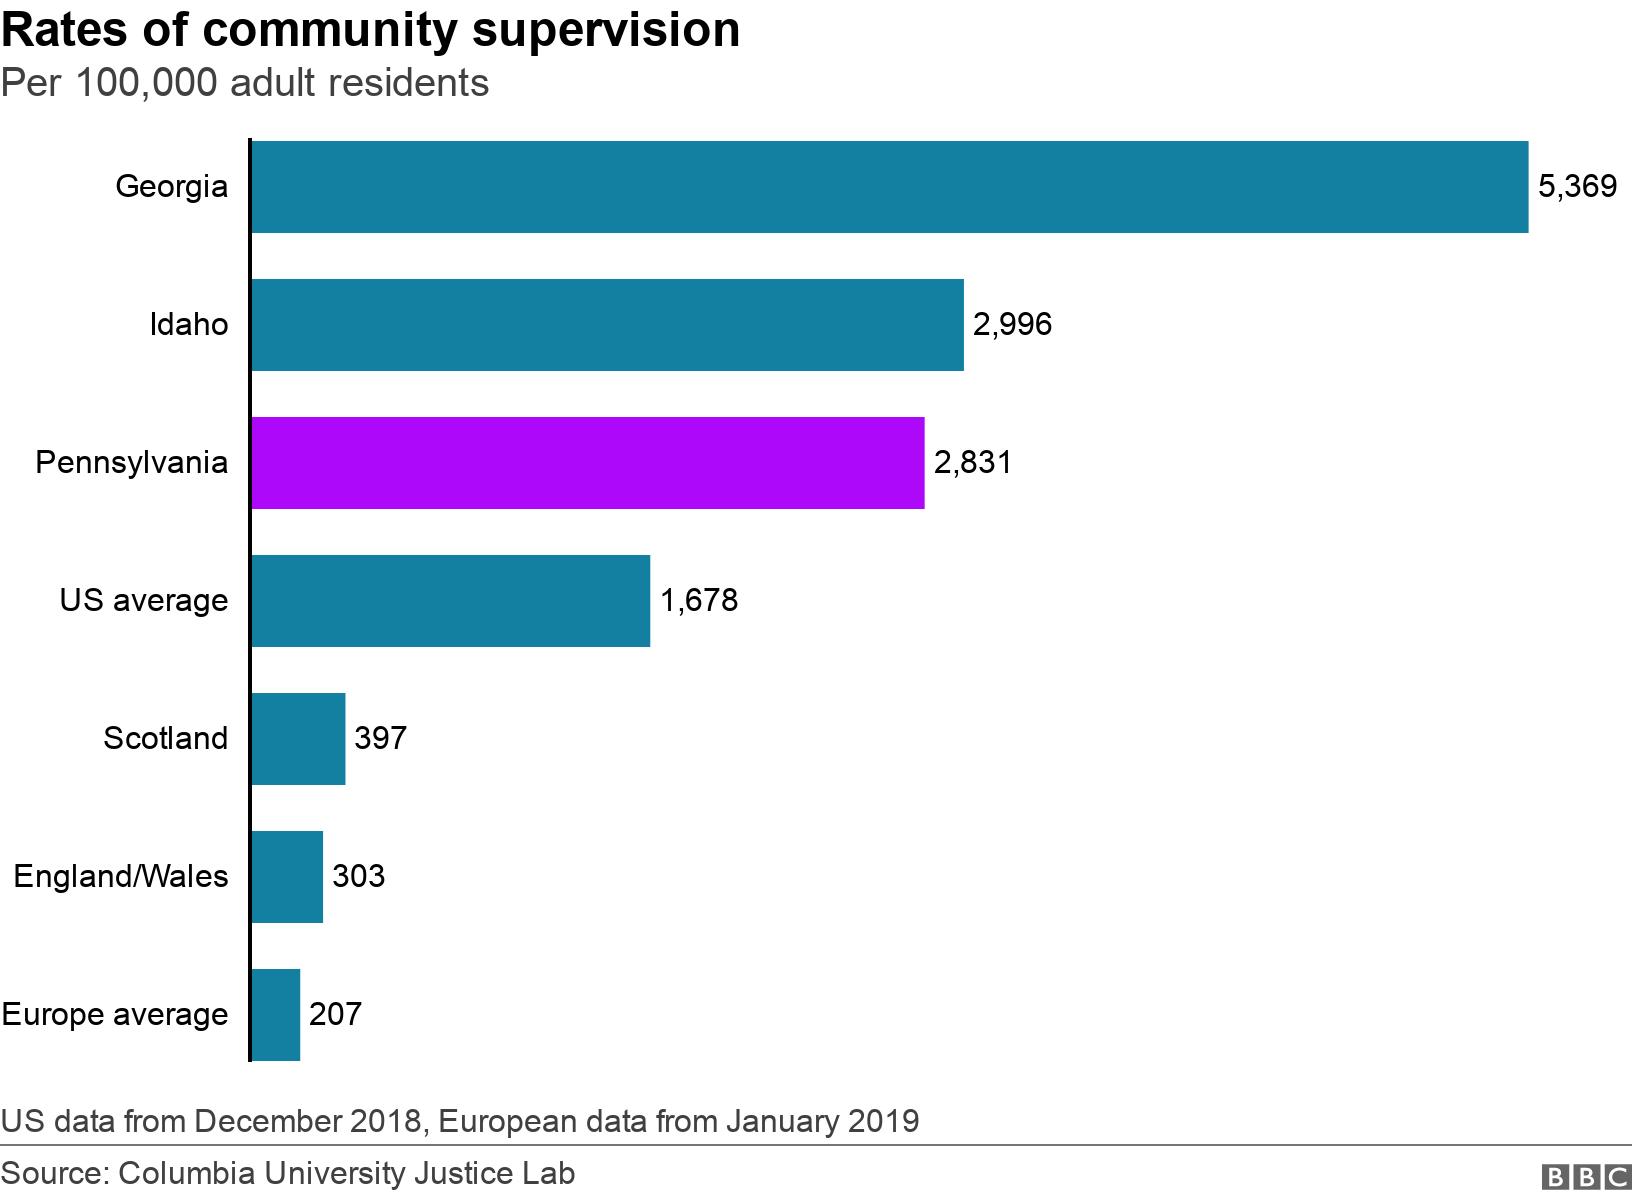 Rates of community supervision. Per 100,000 adult residents.  US data from December 2018, European data from January 2019.